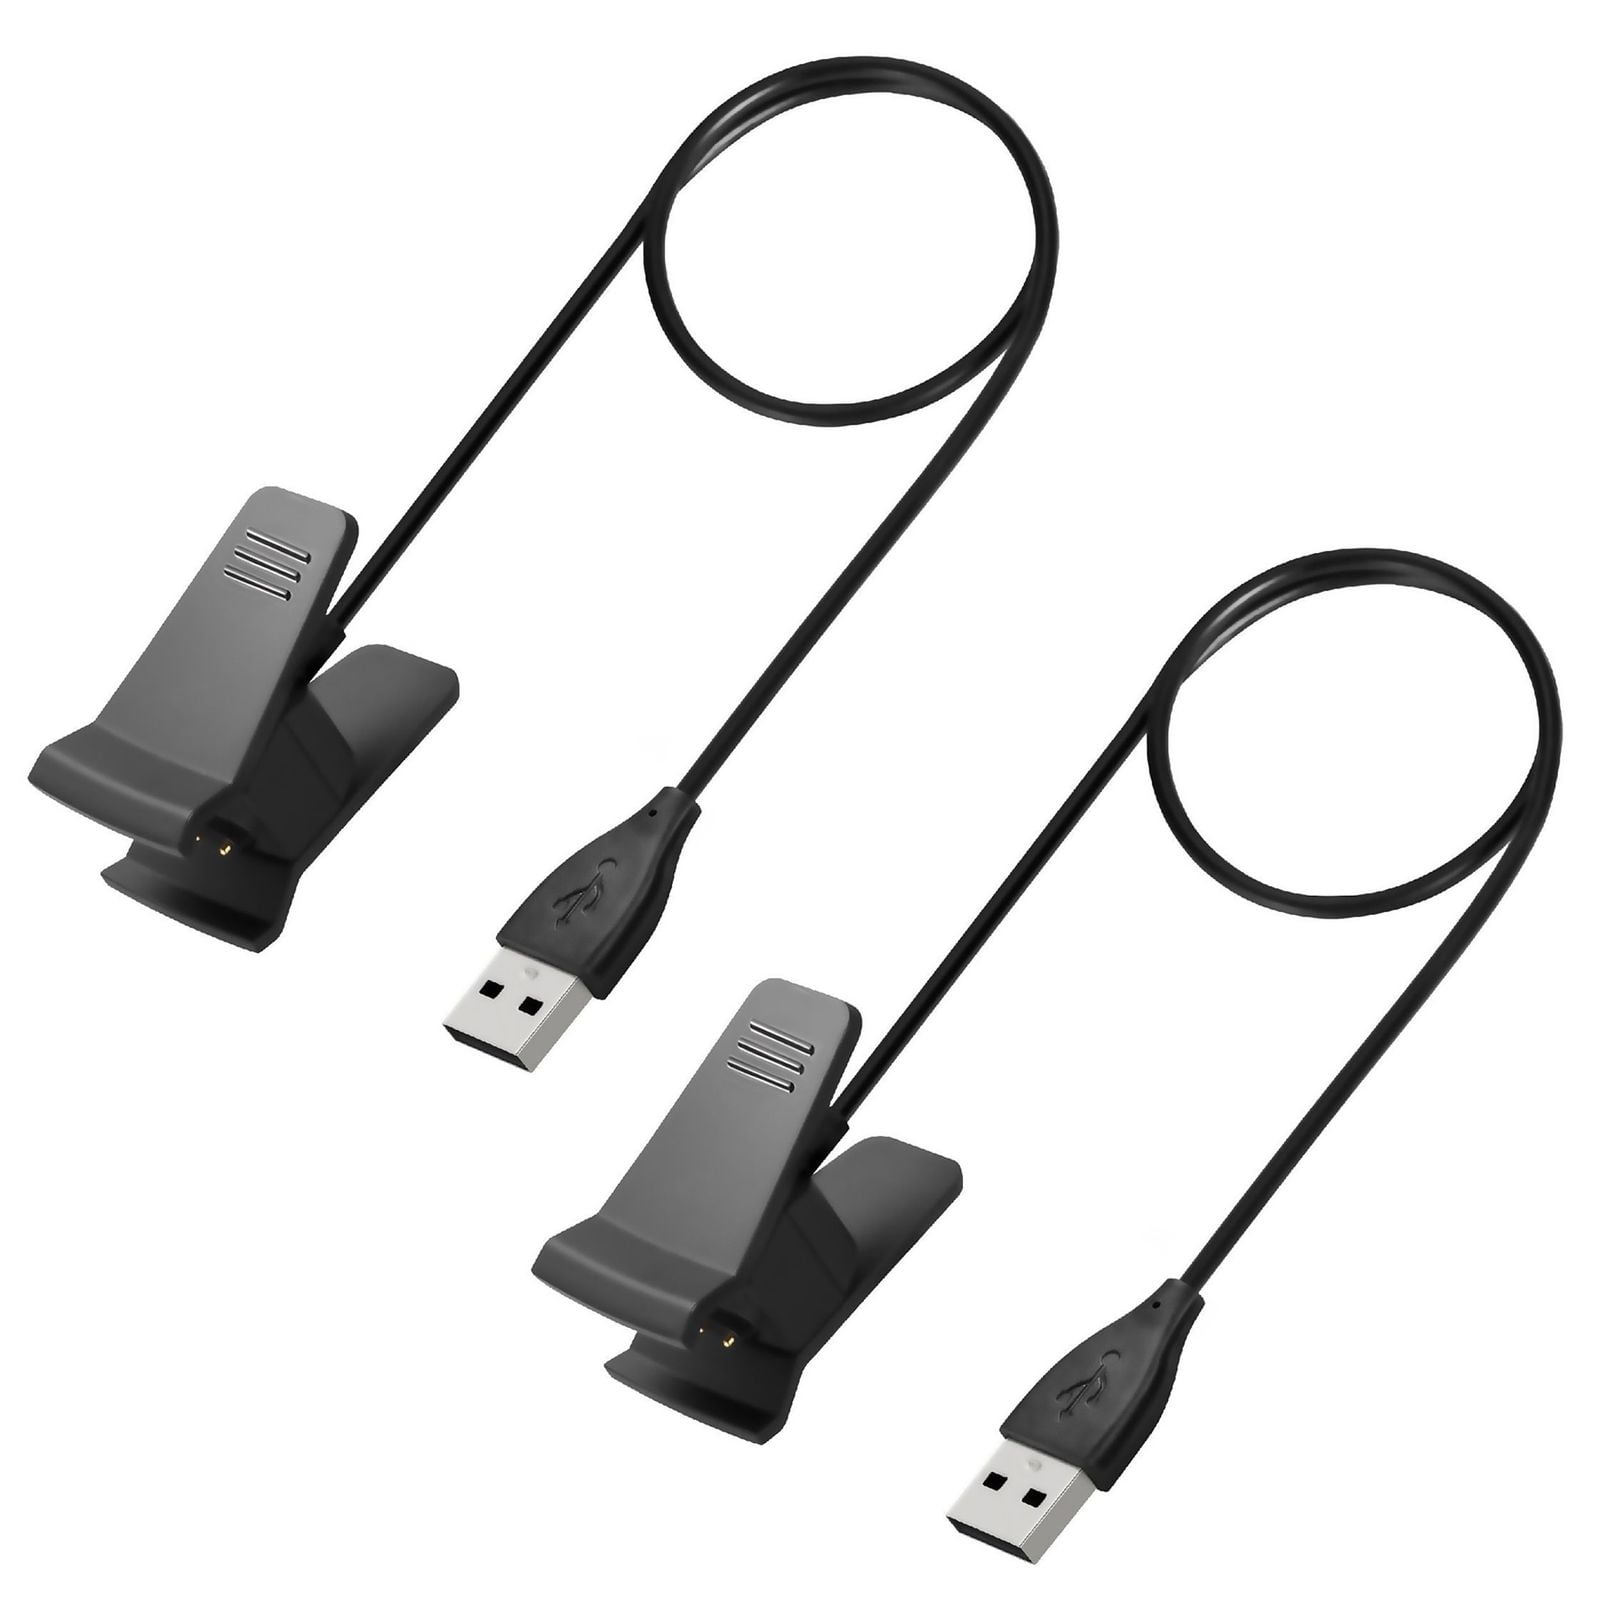 55/100cm USB Charging Cable Cord Clip Dock for Fitbit Charge 3 FitnessTracker 